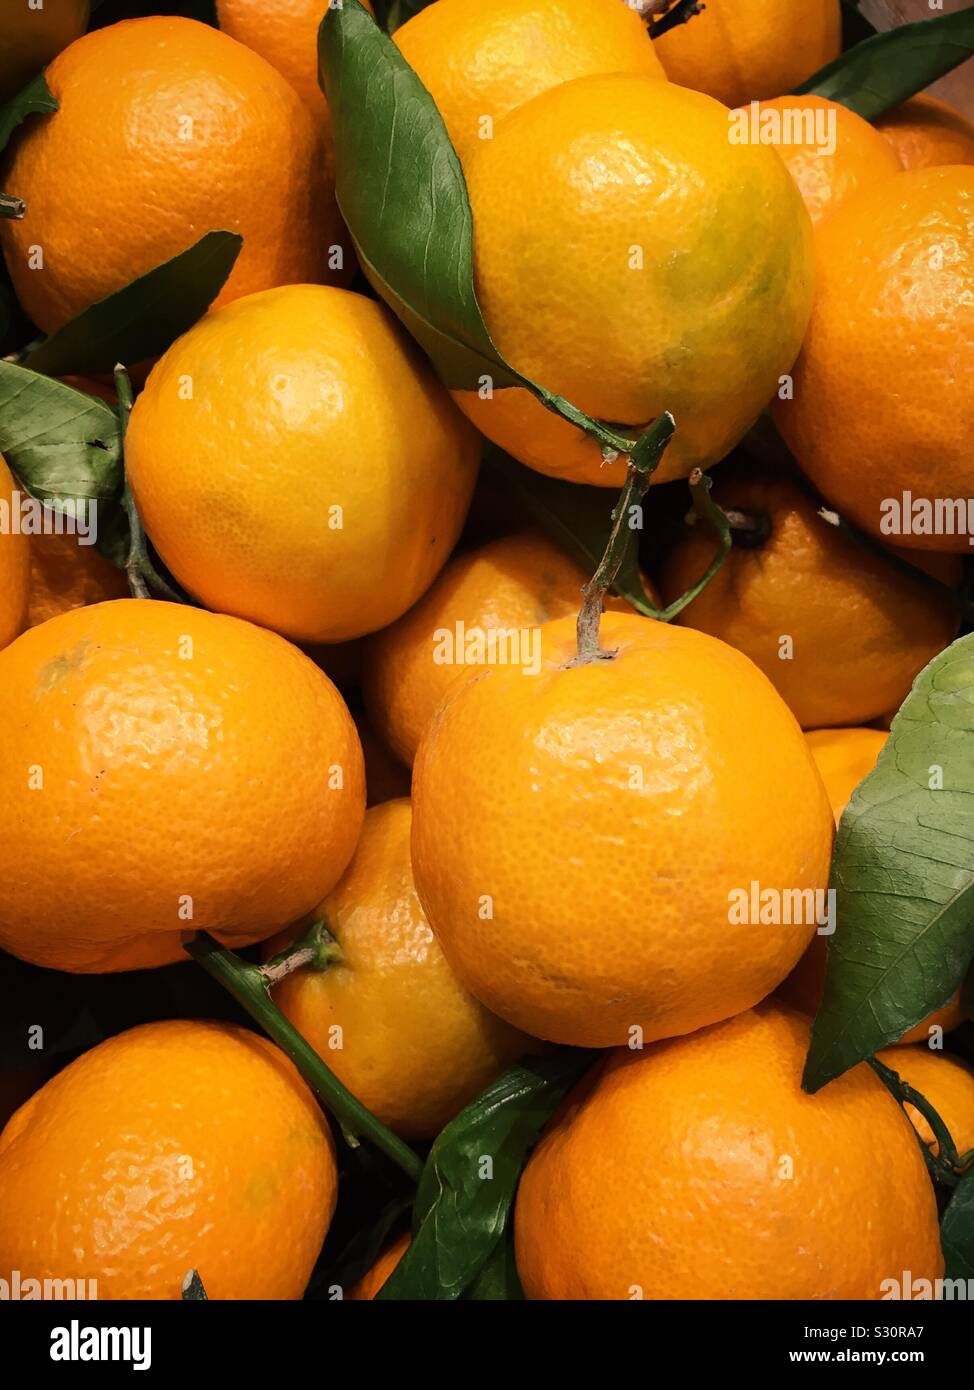 Mandarin oranges for sale in the produce aisle of the grocery store, USA Stock Photo